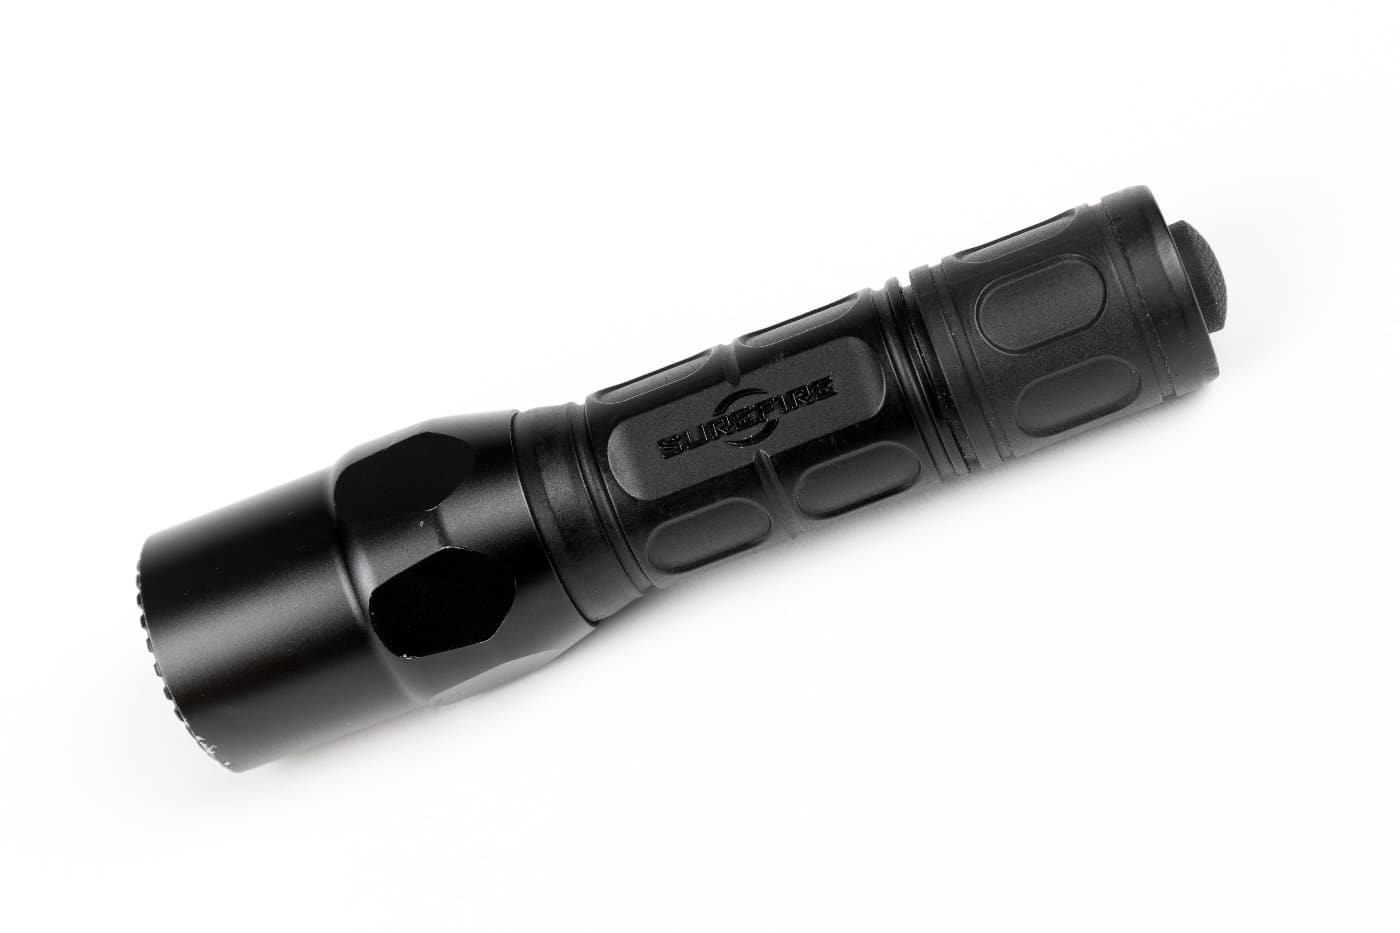 Surefire G2X Tactical flashlight review for self defense